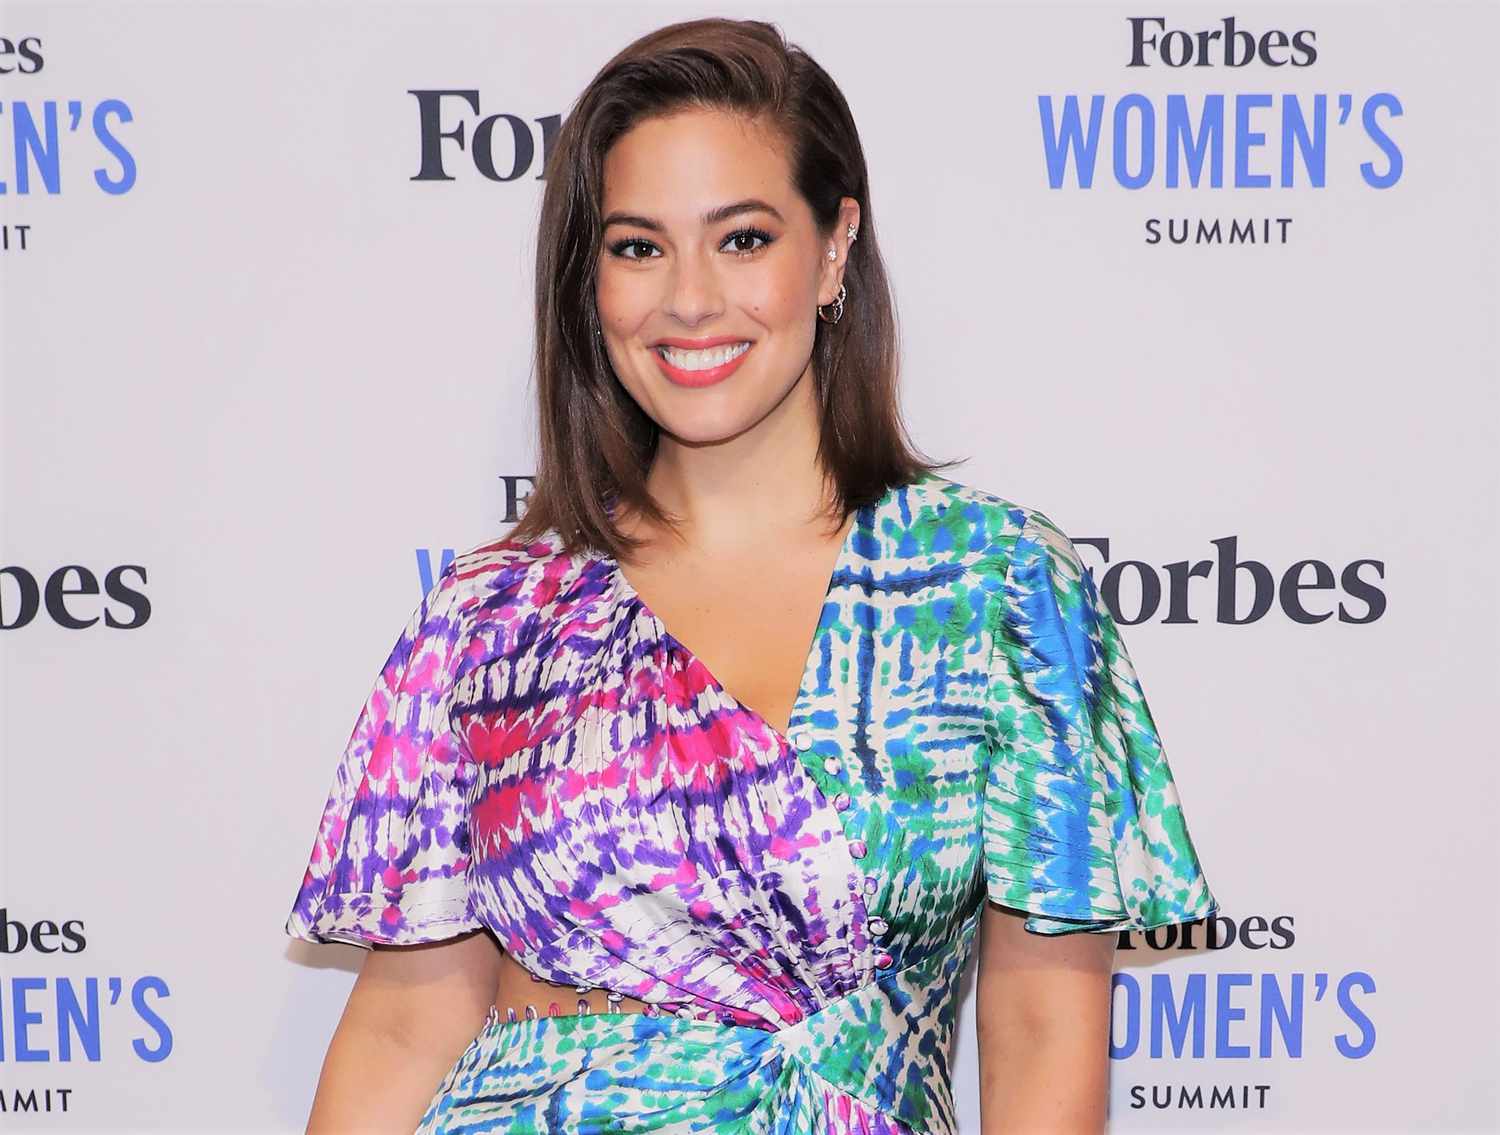 Ashley Graham at the 2019 Forbes Women's Summit